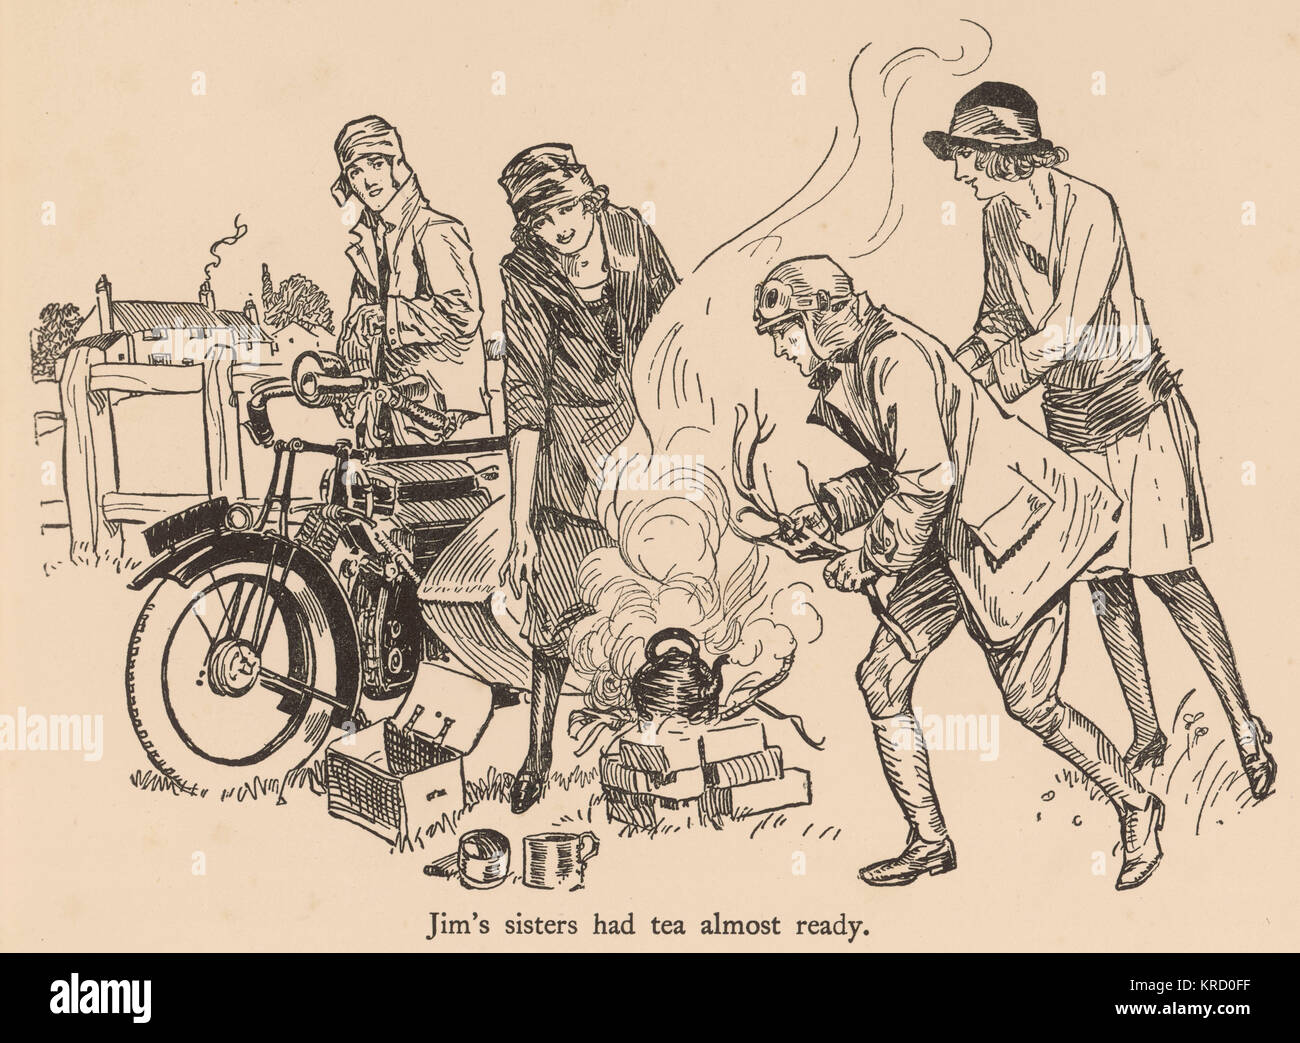 Arriving at a campsite, a pair of motorcyclists are helped to boil a kettle for a cup of tea by some helpful girls.     Date: c.1925 Stock Photo